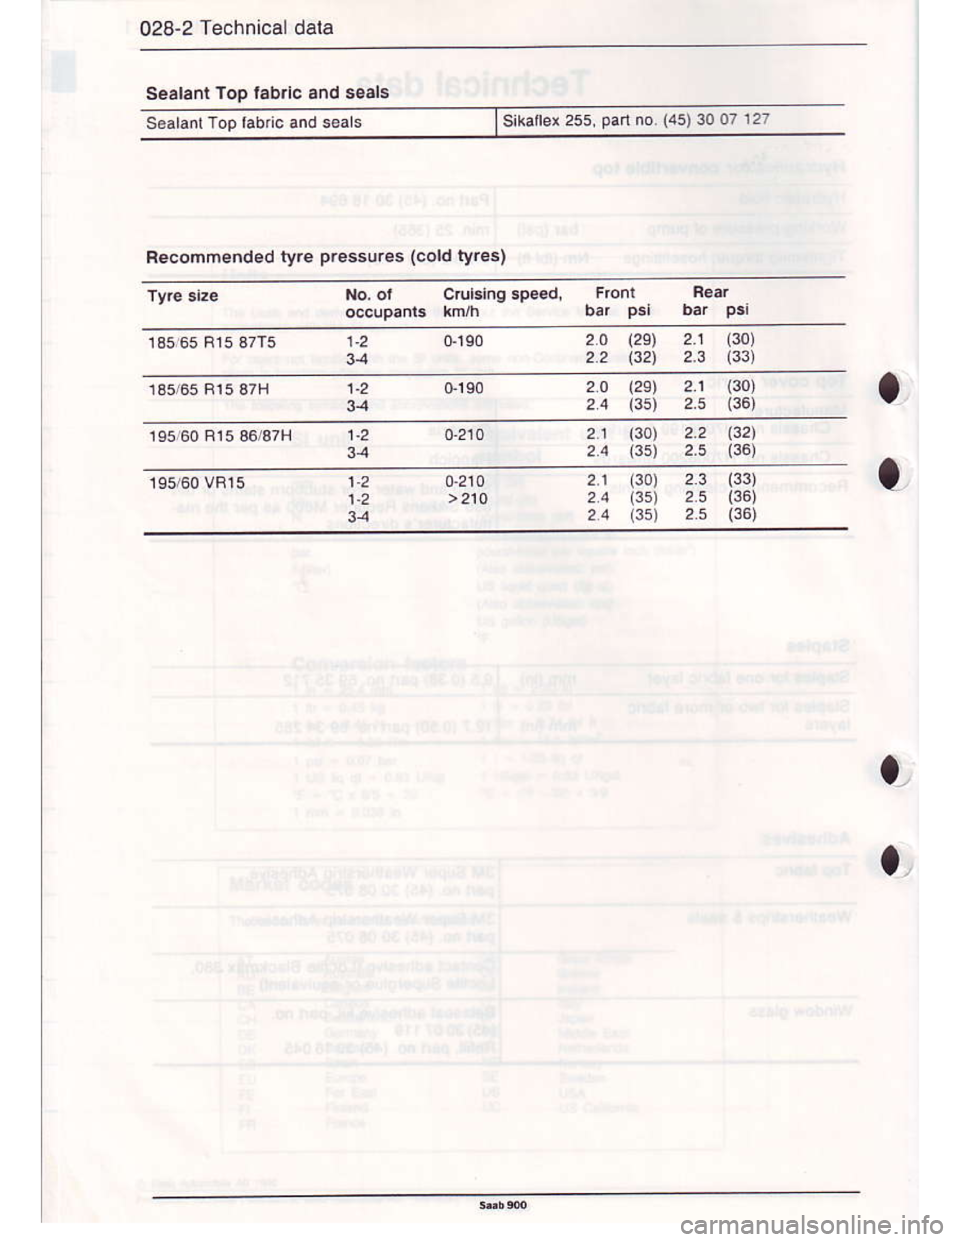 SAAB 900 1986  Service Manual Downloaded from www.Manualslib.com manuals search engine 028-2 Technical data
Seglant Too fab.lc and s€als
Sealanl ToP lab c.nd seals
Recommended tyre pressures (cold tyros)
Sirarler 255 pan no (45)